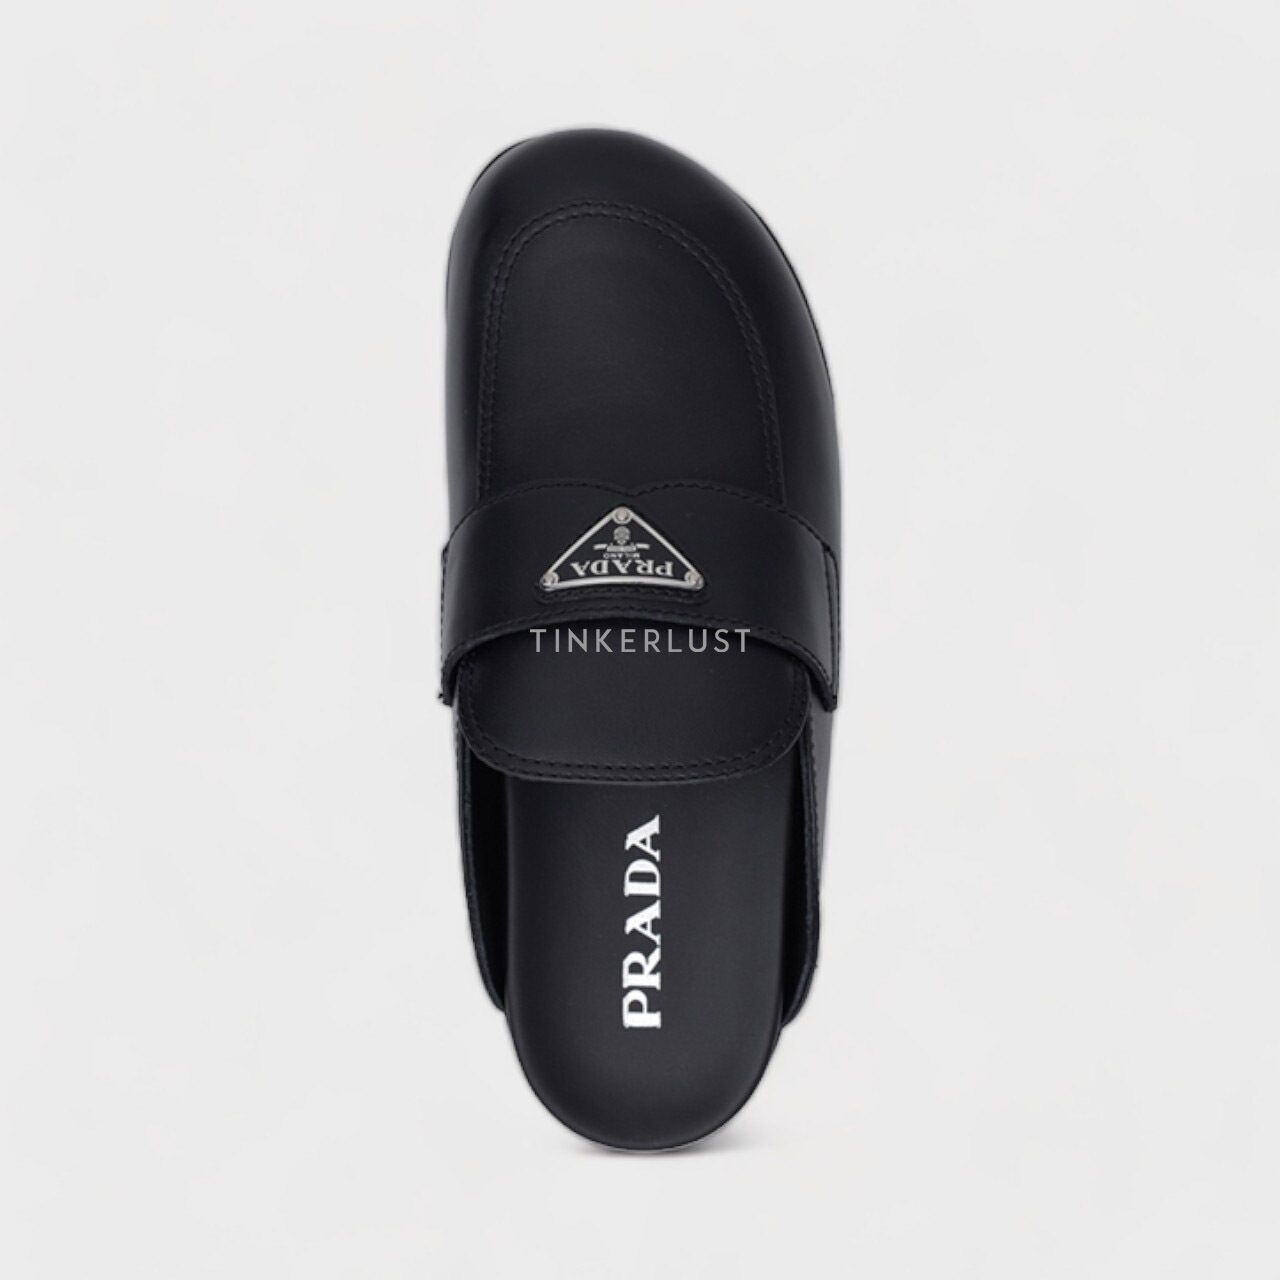 PRADA Women Triangle Logo Mules 20mm in Black Leather with Upper Band